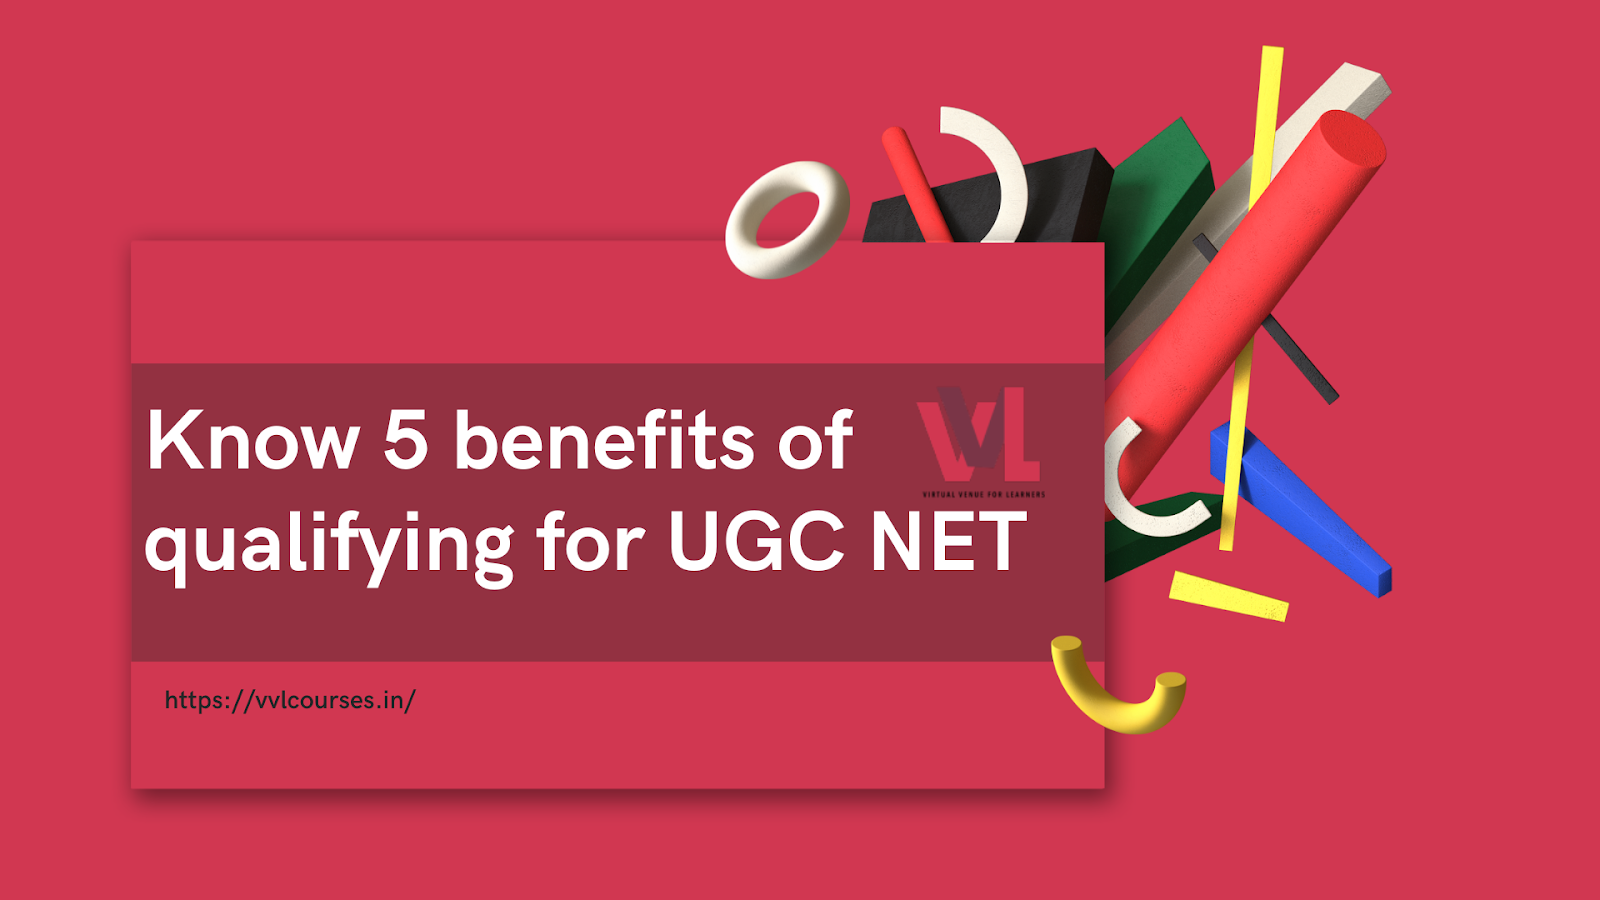 CR J

Know 5 benefits of & |
qualifying for UGC NET Al

\/